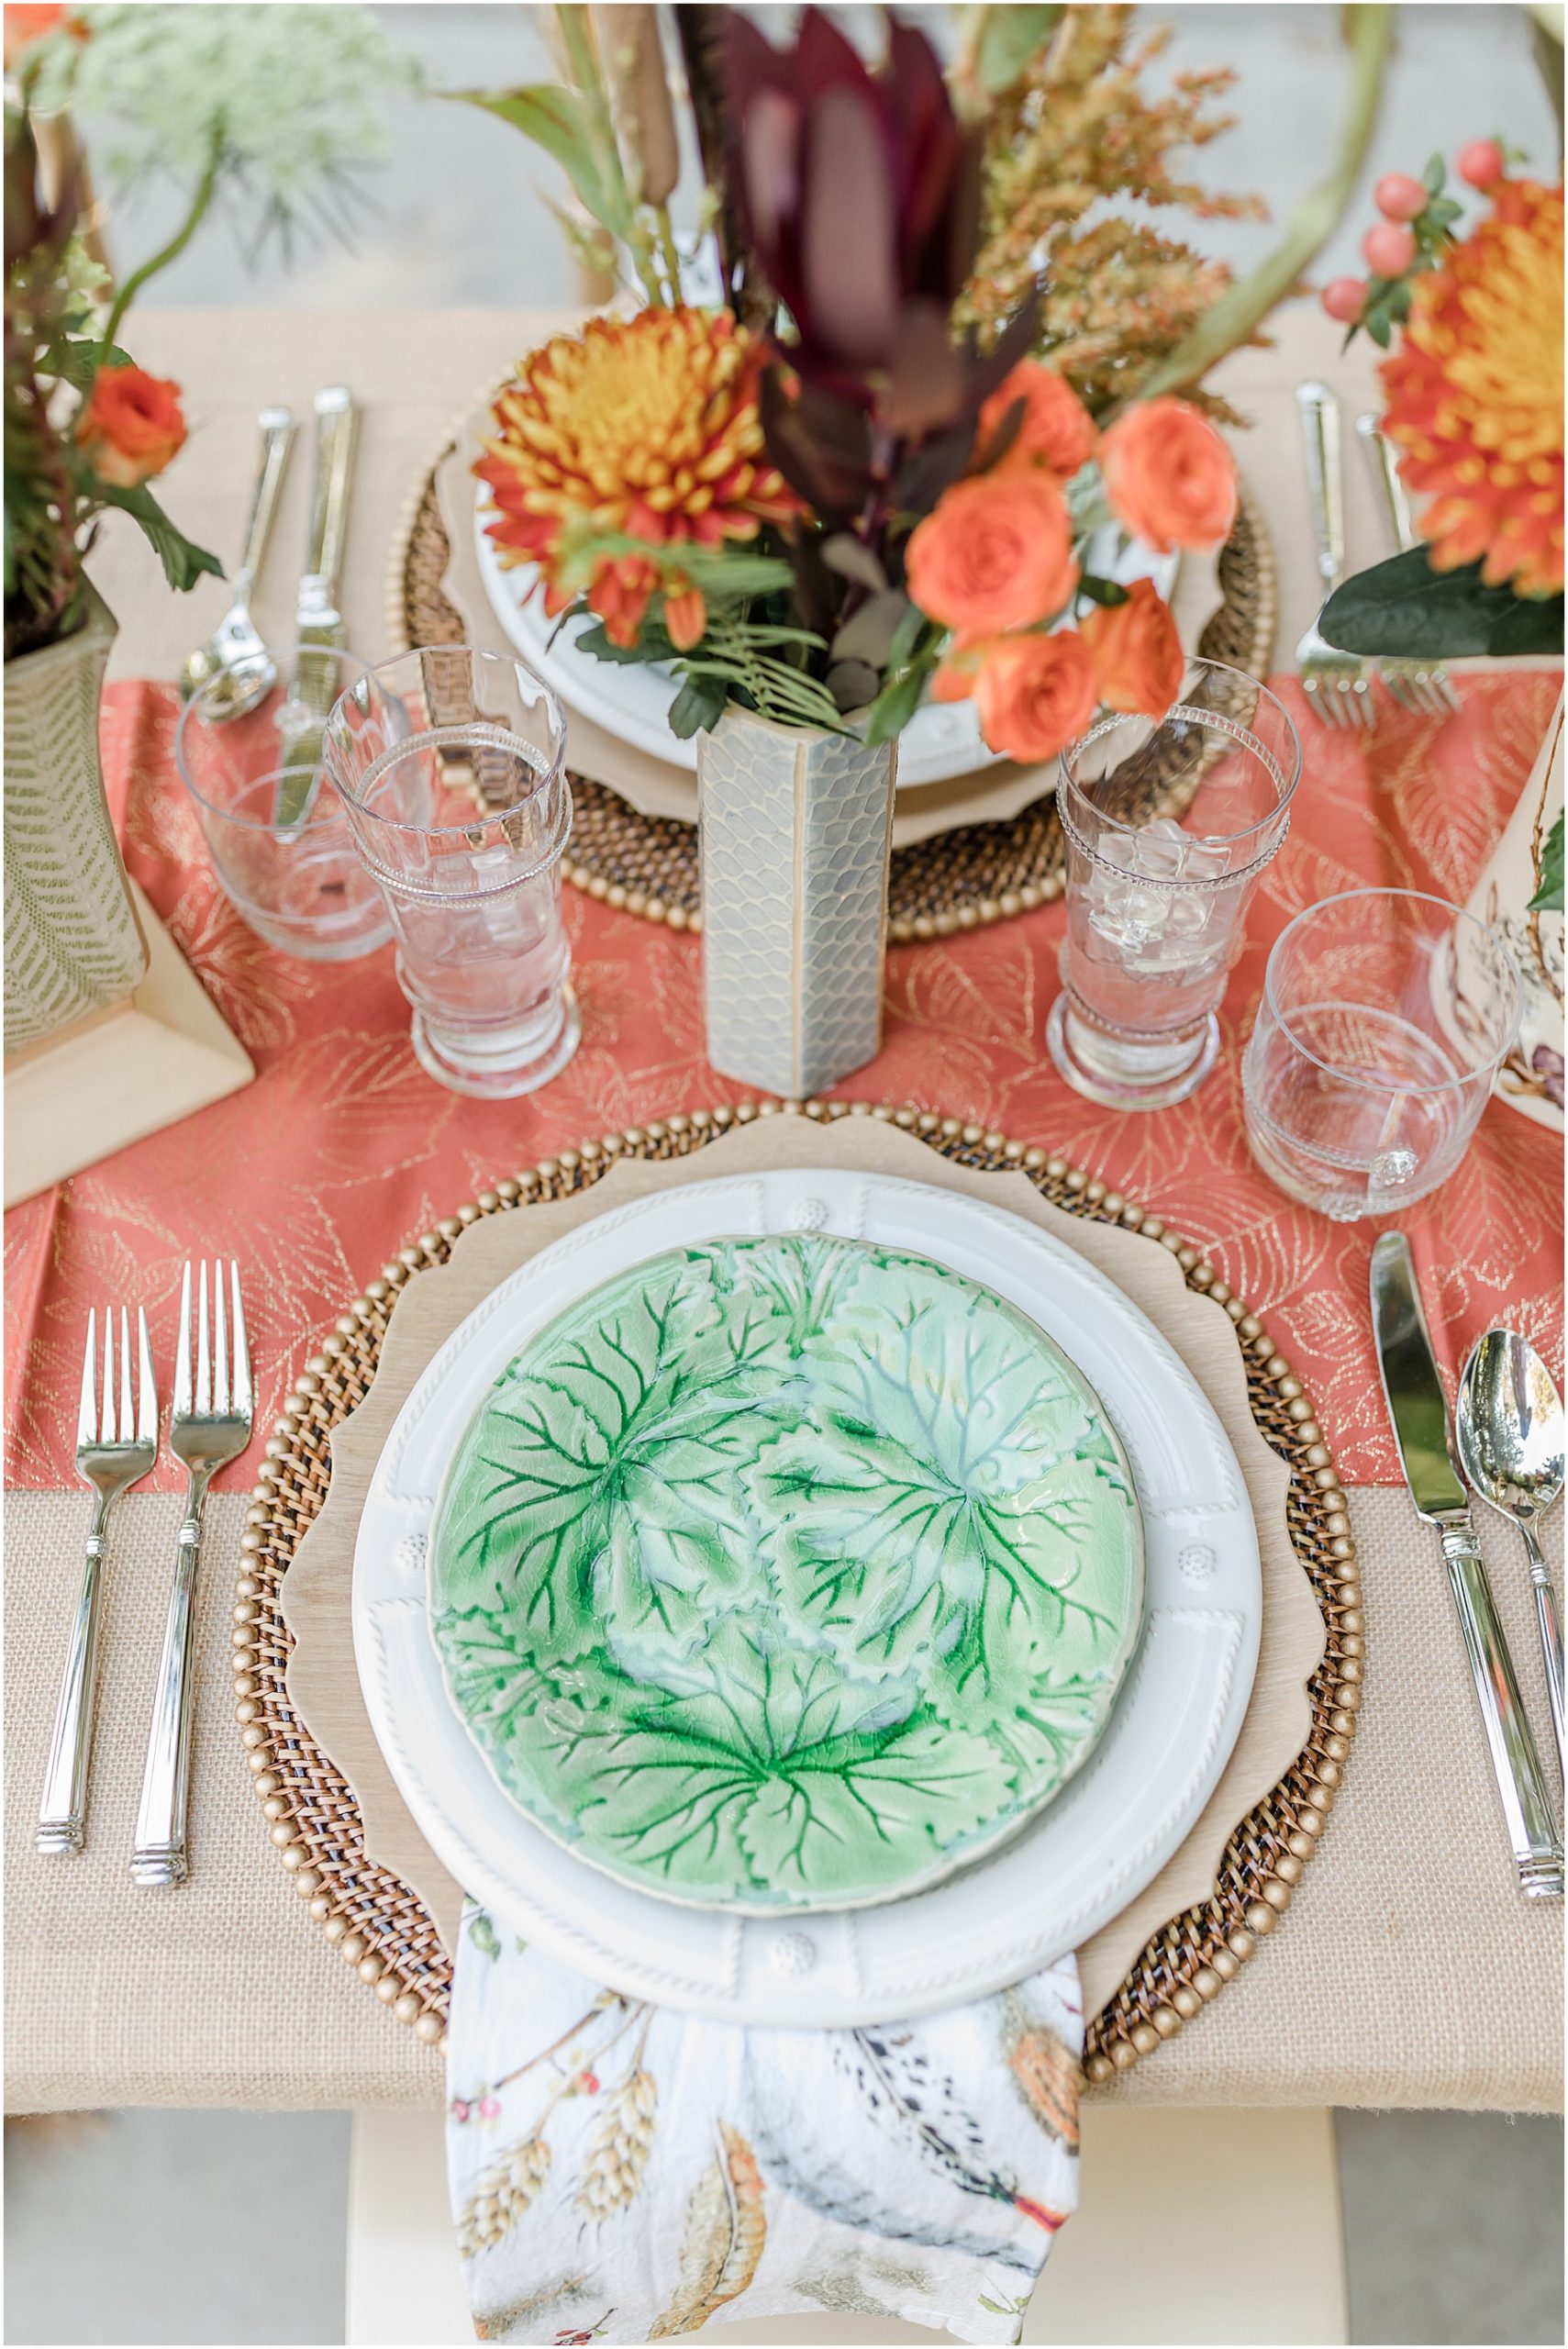 A closeup of a place setting on a fall aesthetic table.